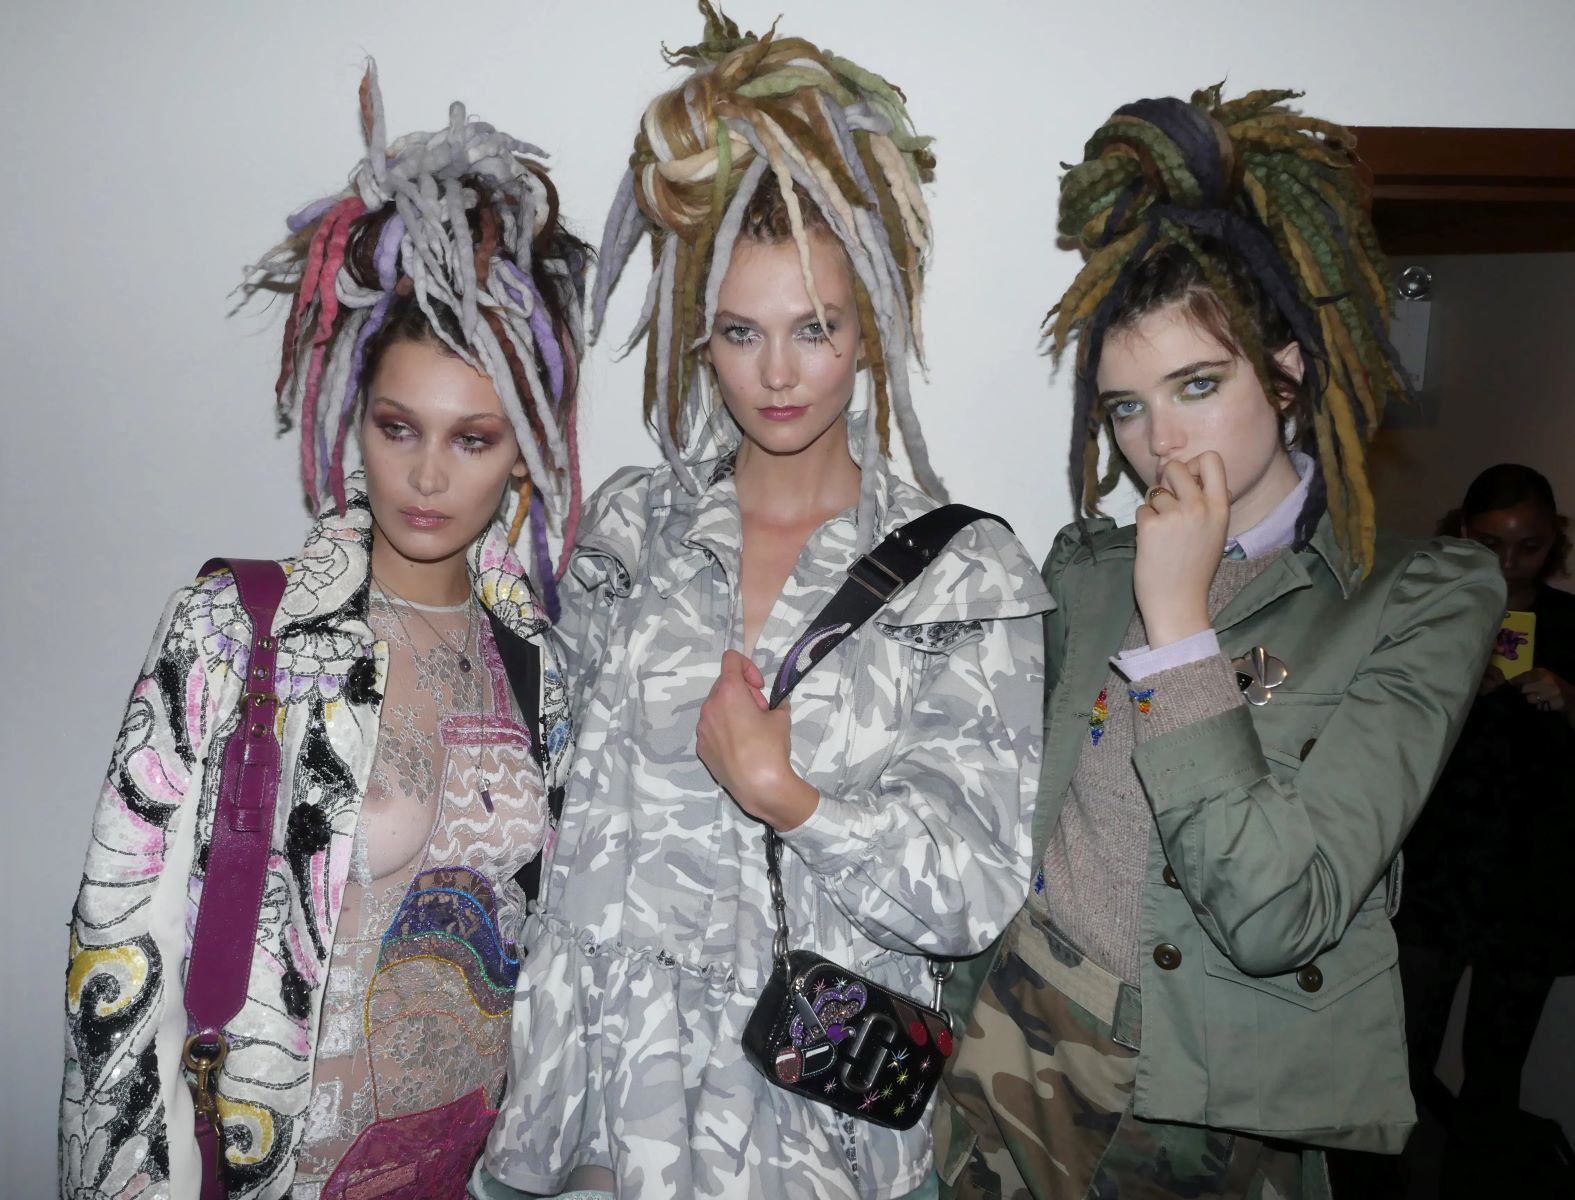 The Controversial Trend: Cultural Appropriation Or Fashion Statement?